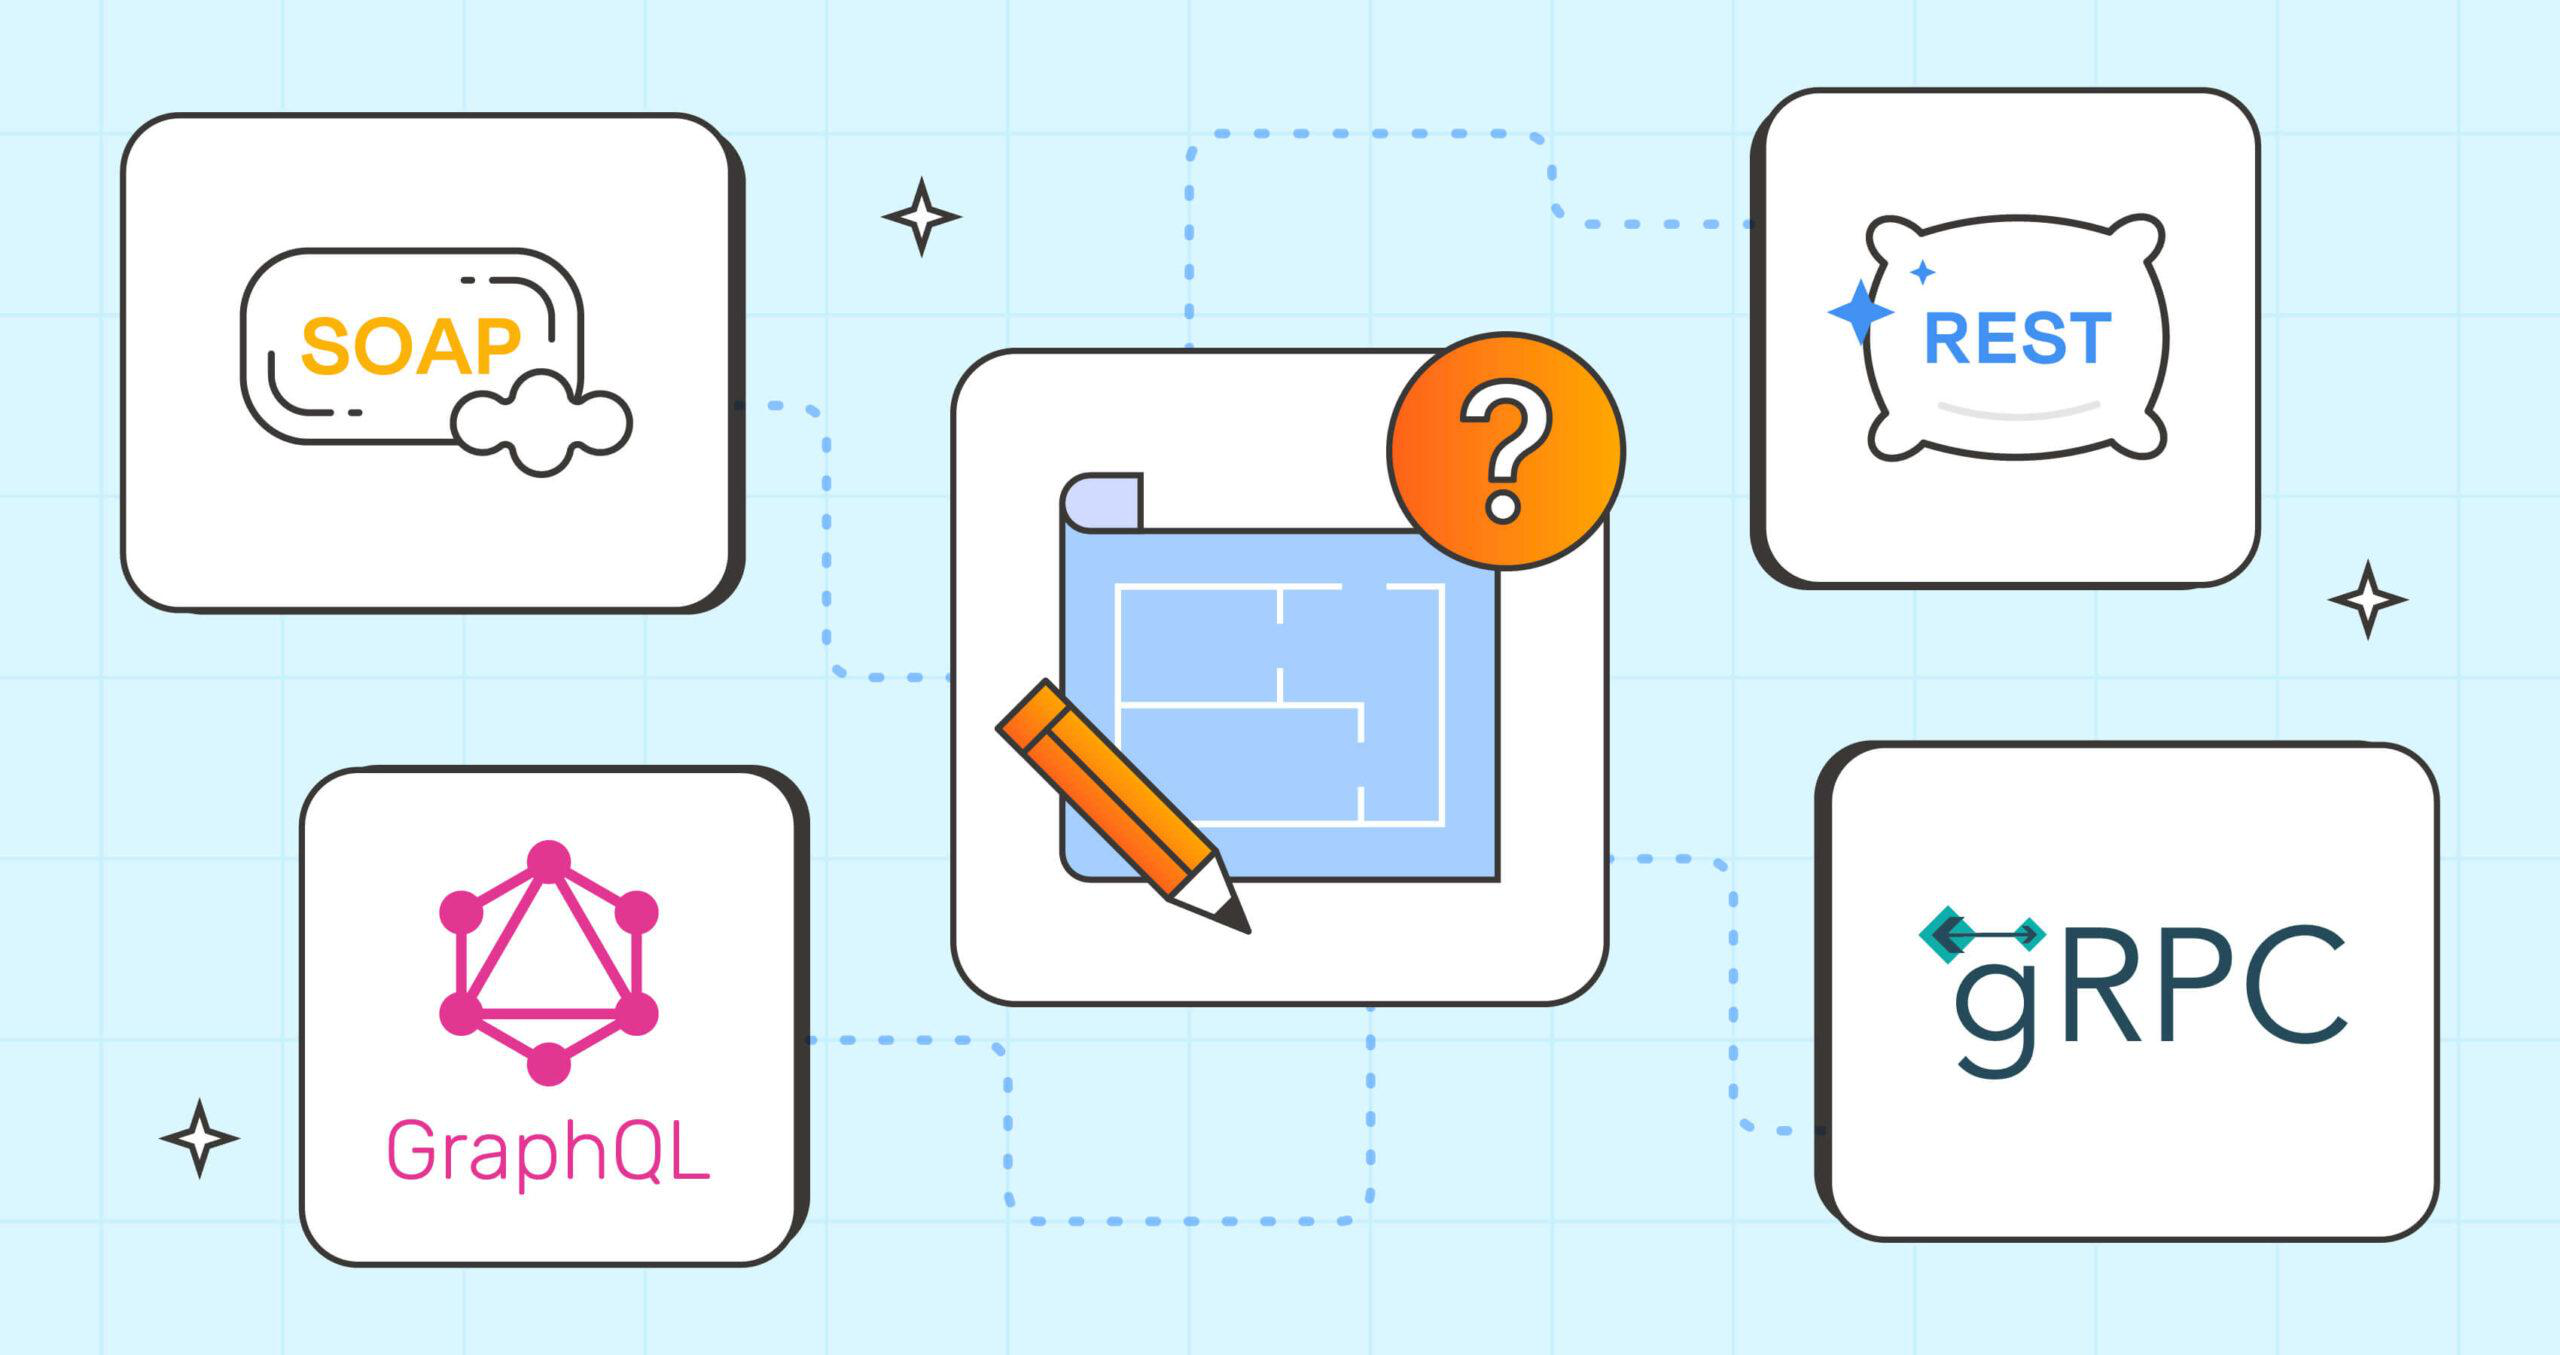 Soap, GraphQL, Rest, and gRPC logos surrounding middle square with penicil and question mark. Illustration.